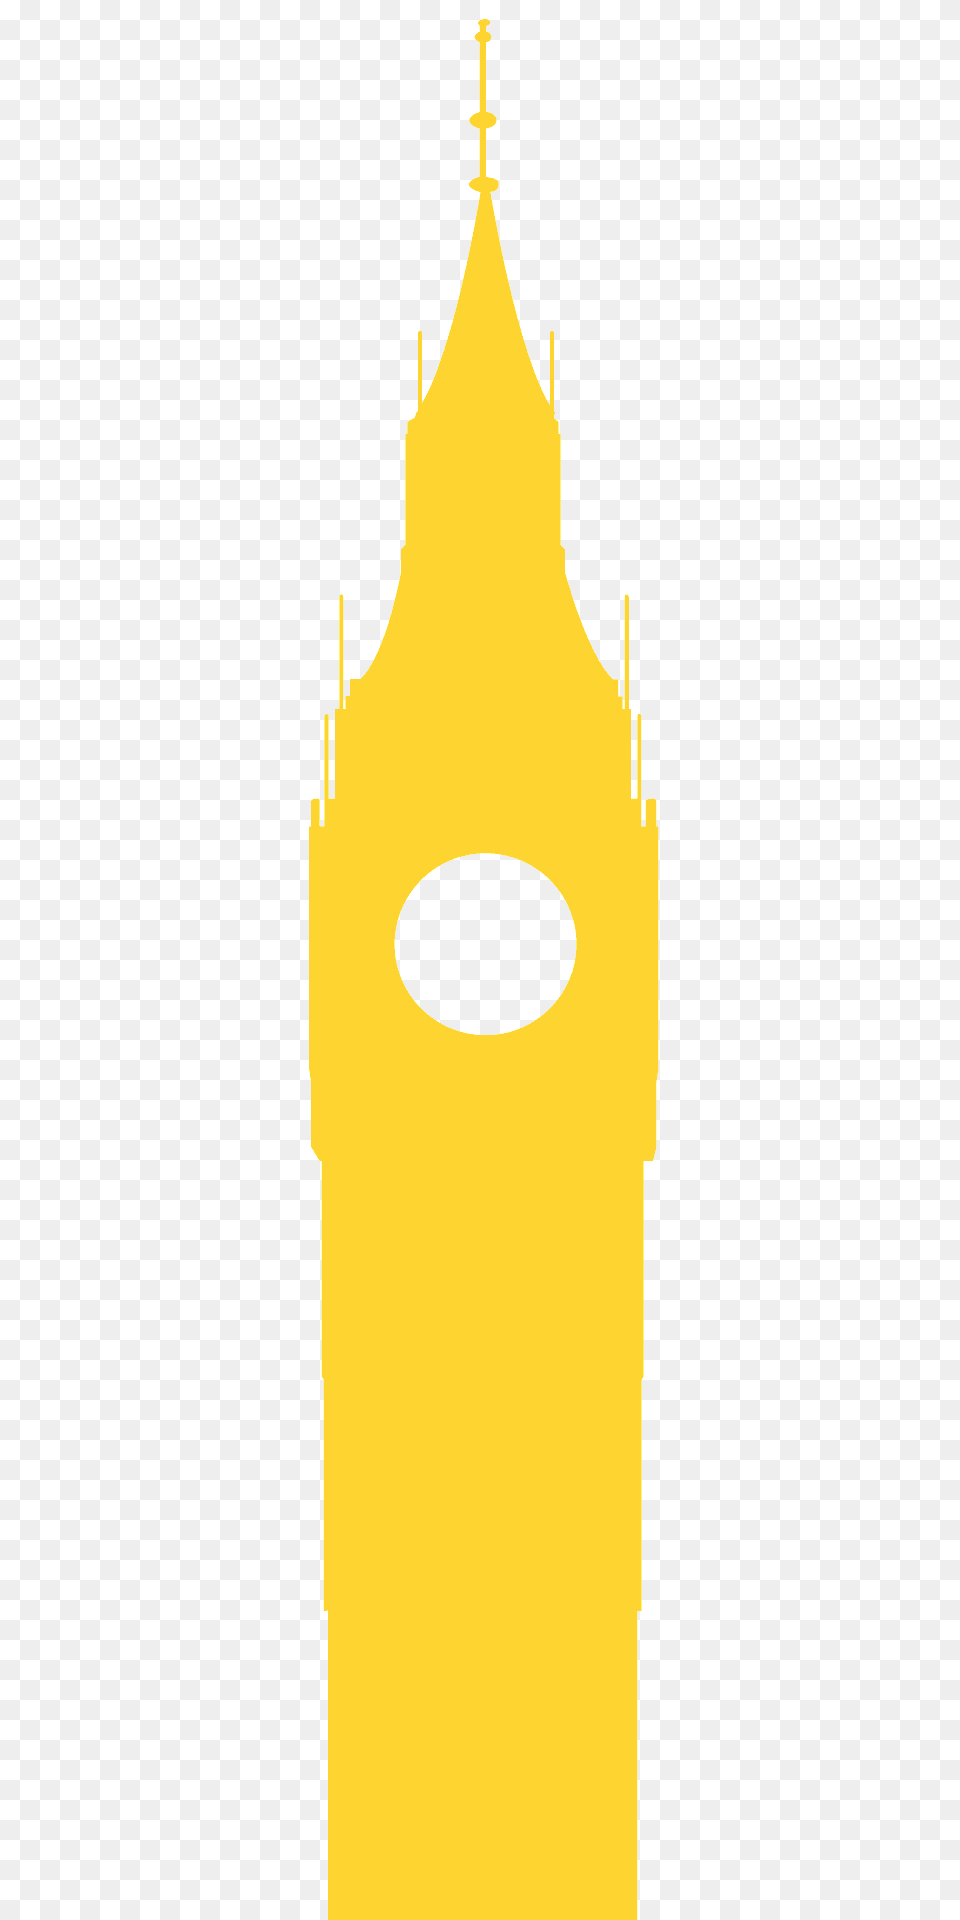 Big Ben Silhouette, Architecture, Bell Tower, Building, Clock Tower Png Image